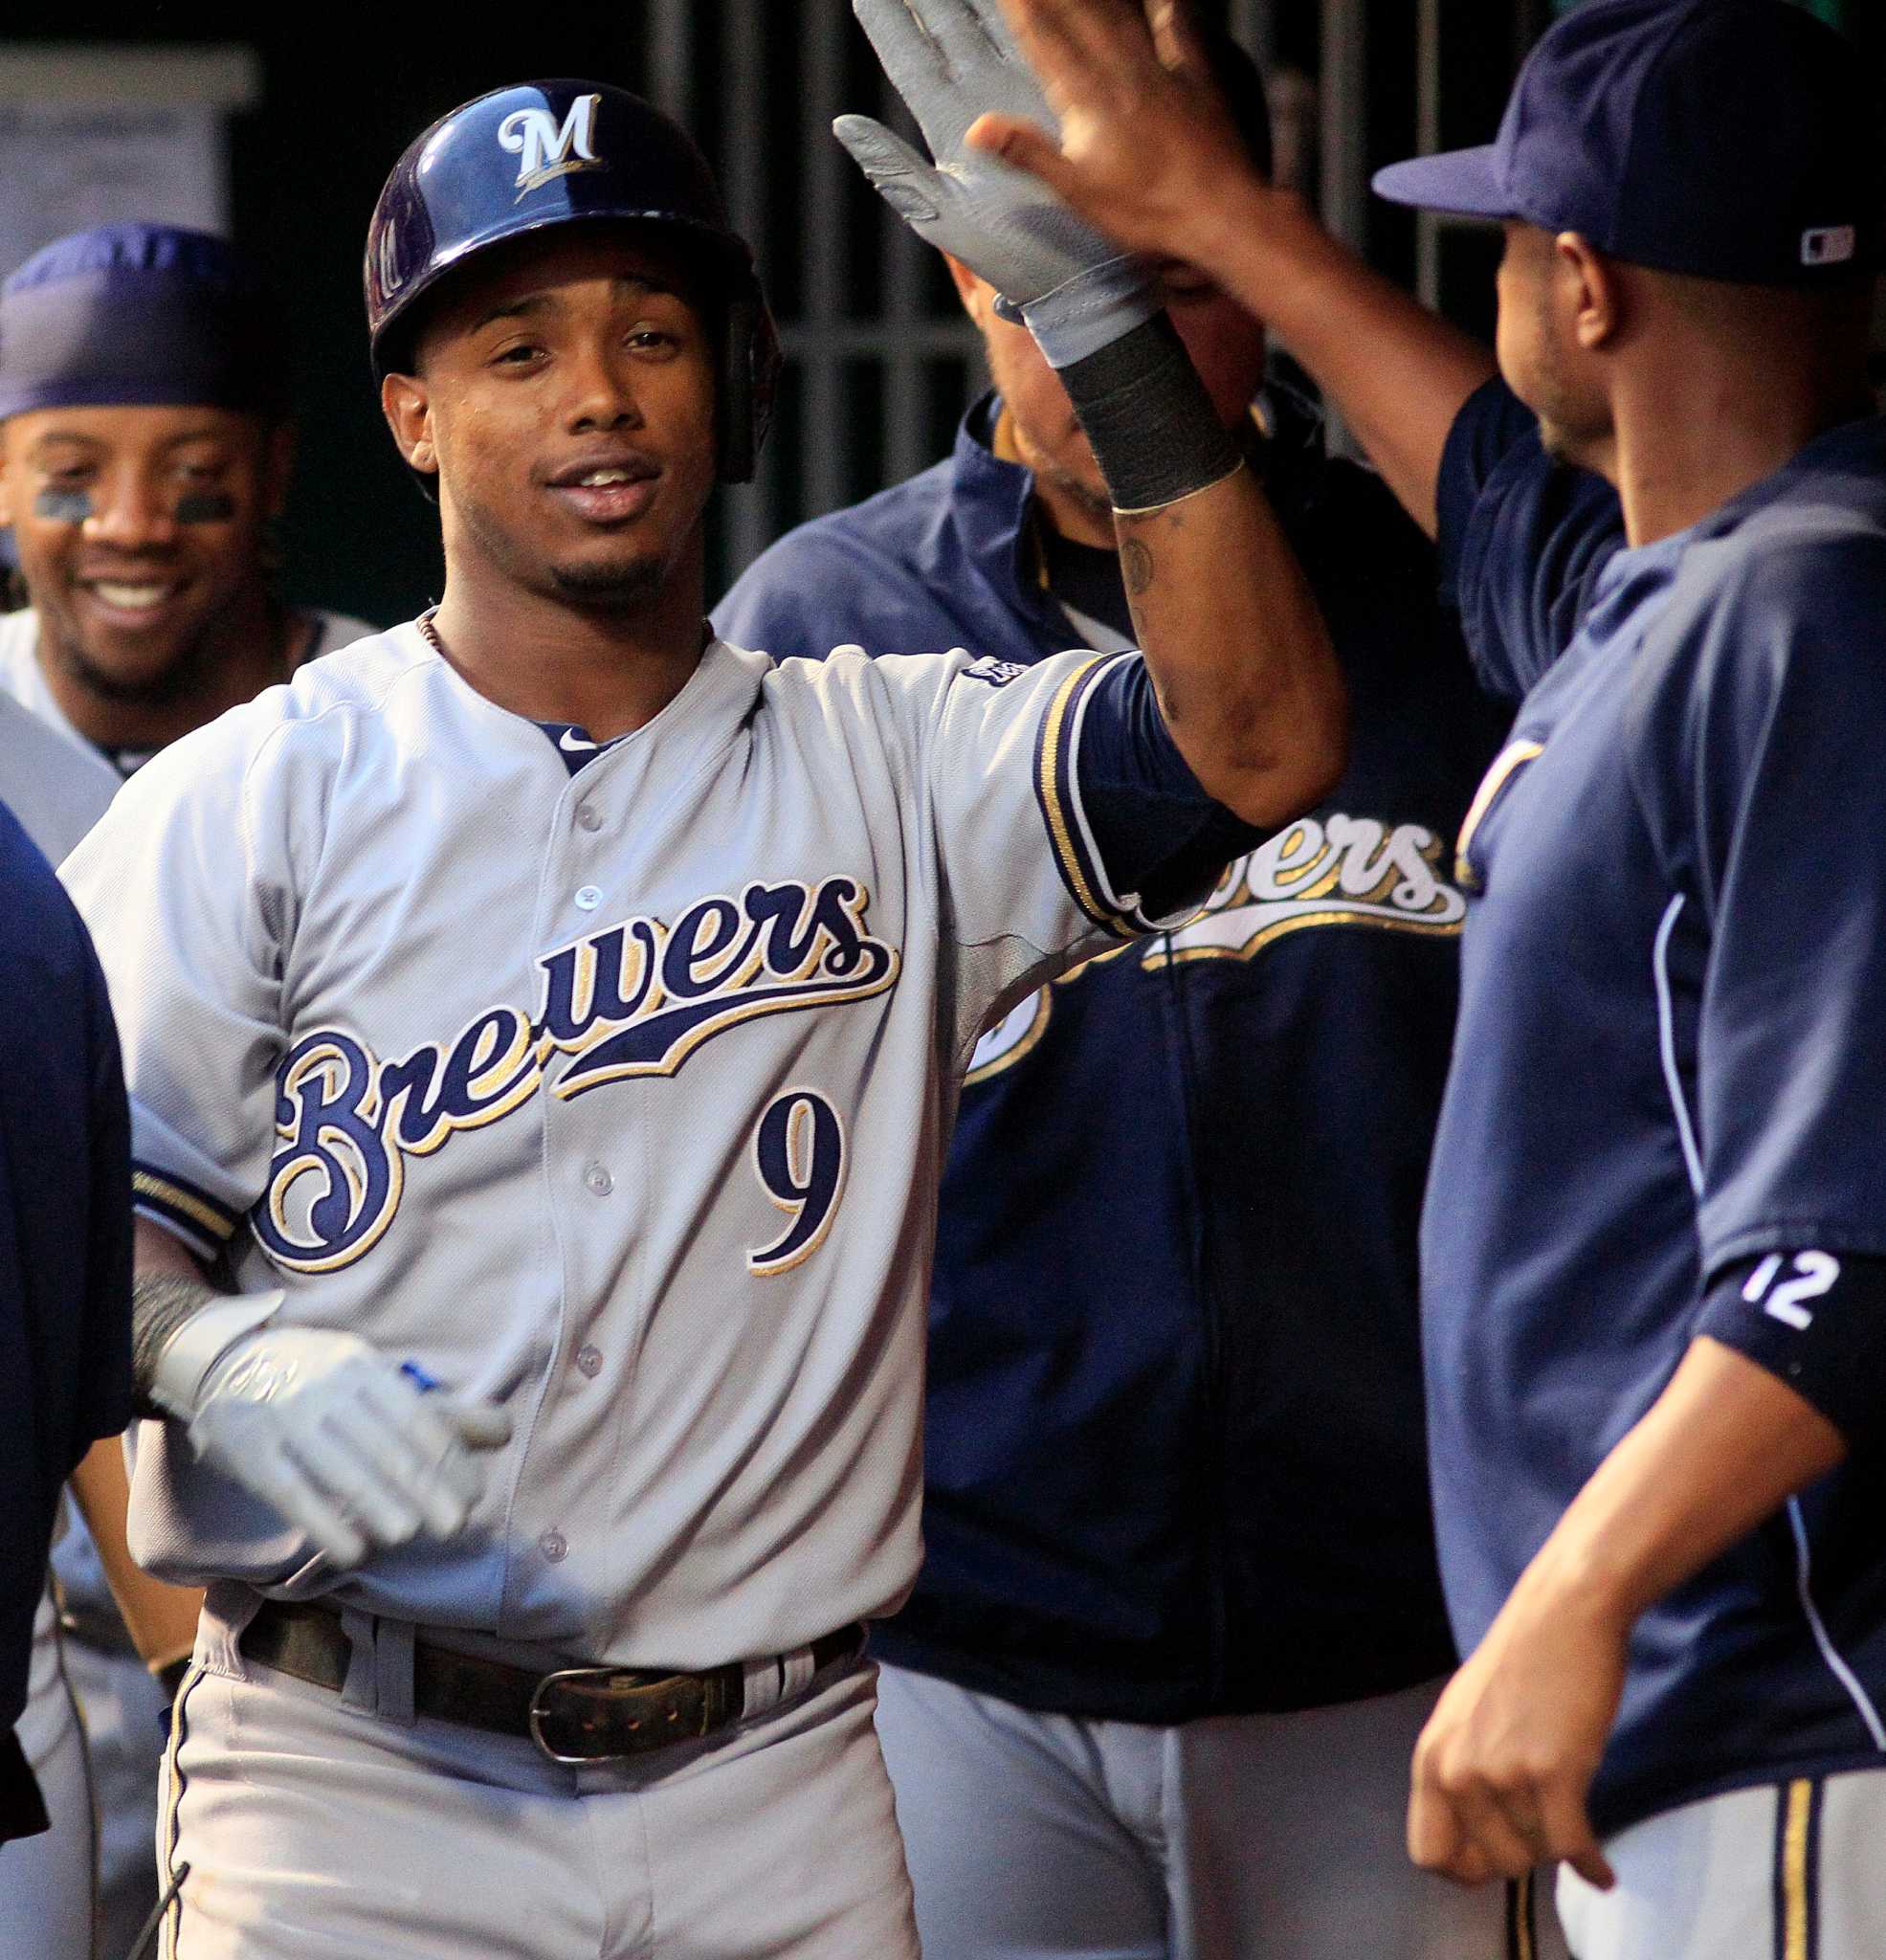 MLB report: Brewers' Segura on leave after son's death